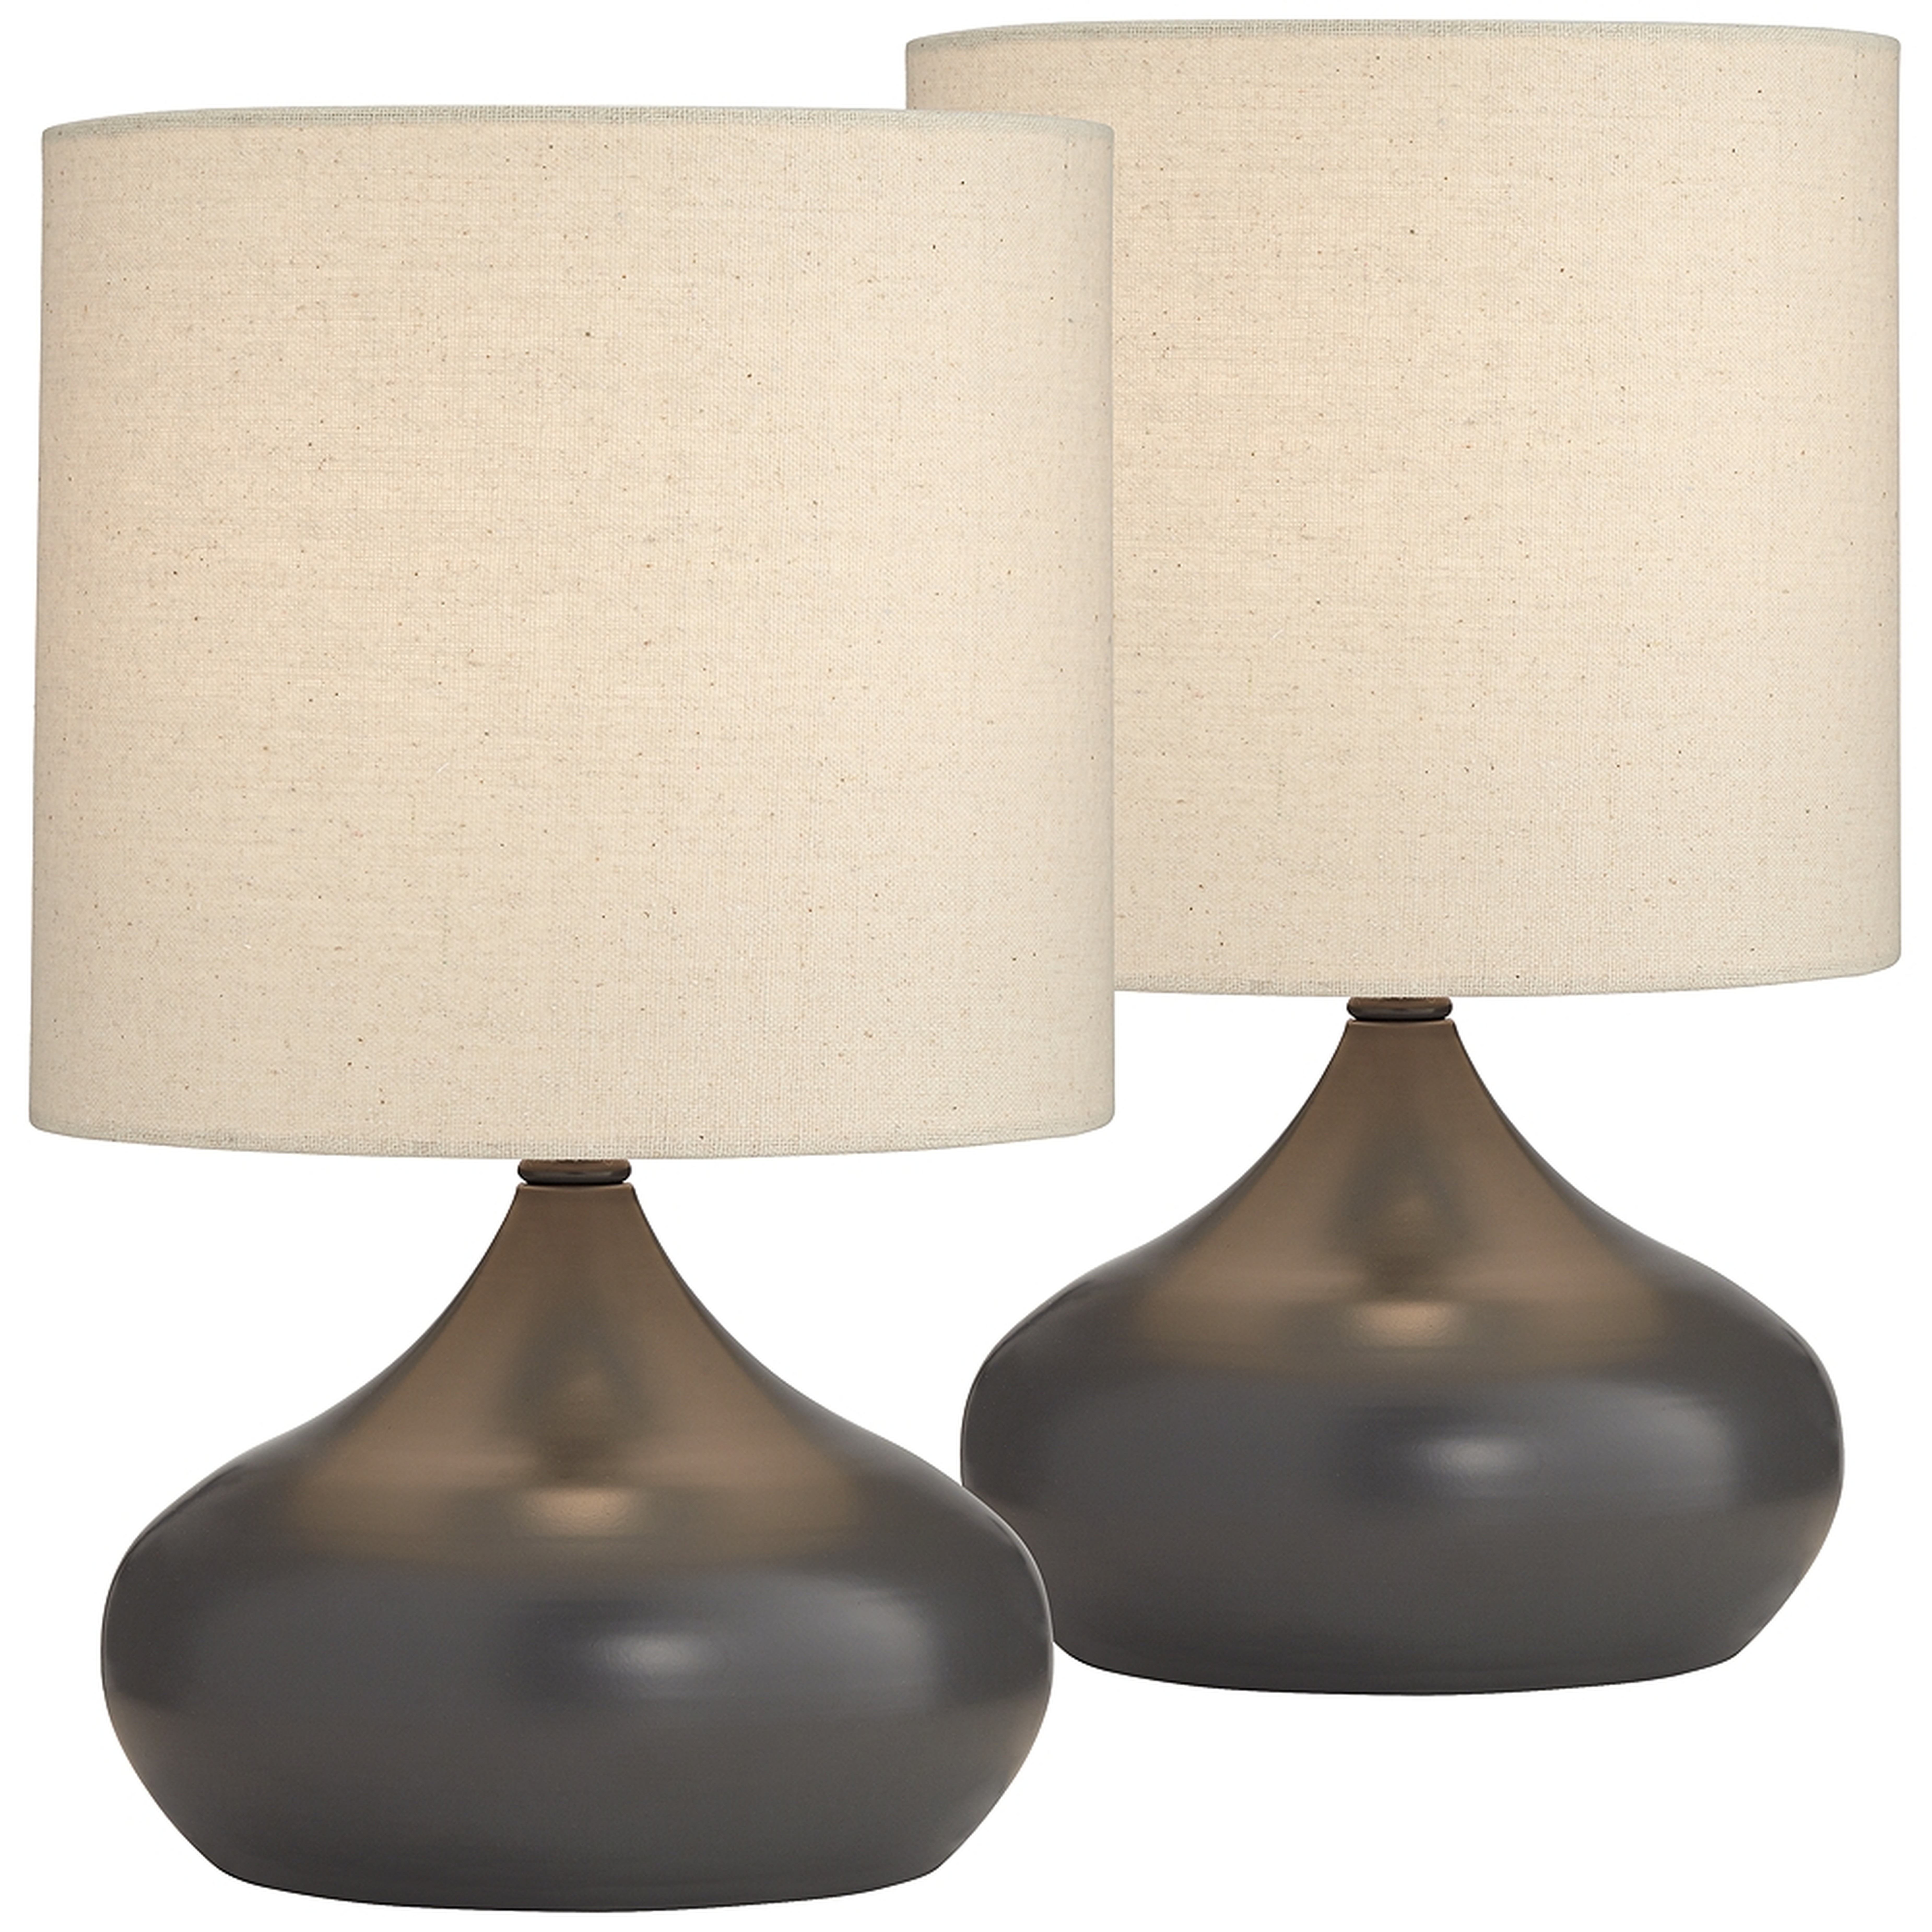 Steel Droplet 14 3/4"H Gray Small Accent Lamps Set of 2 - Style # 37G85 - Lamps Plus